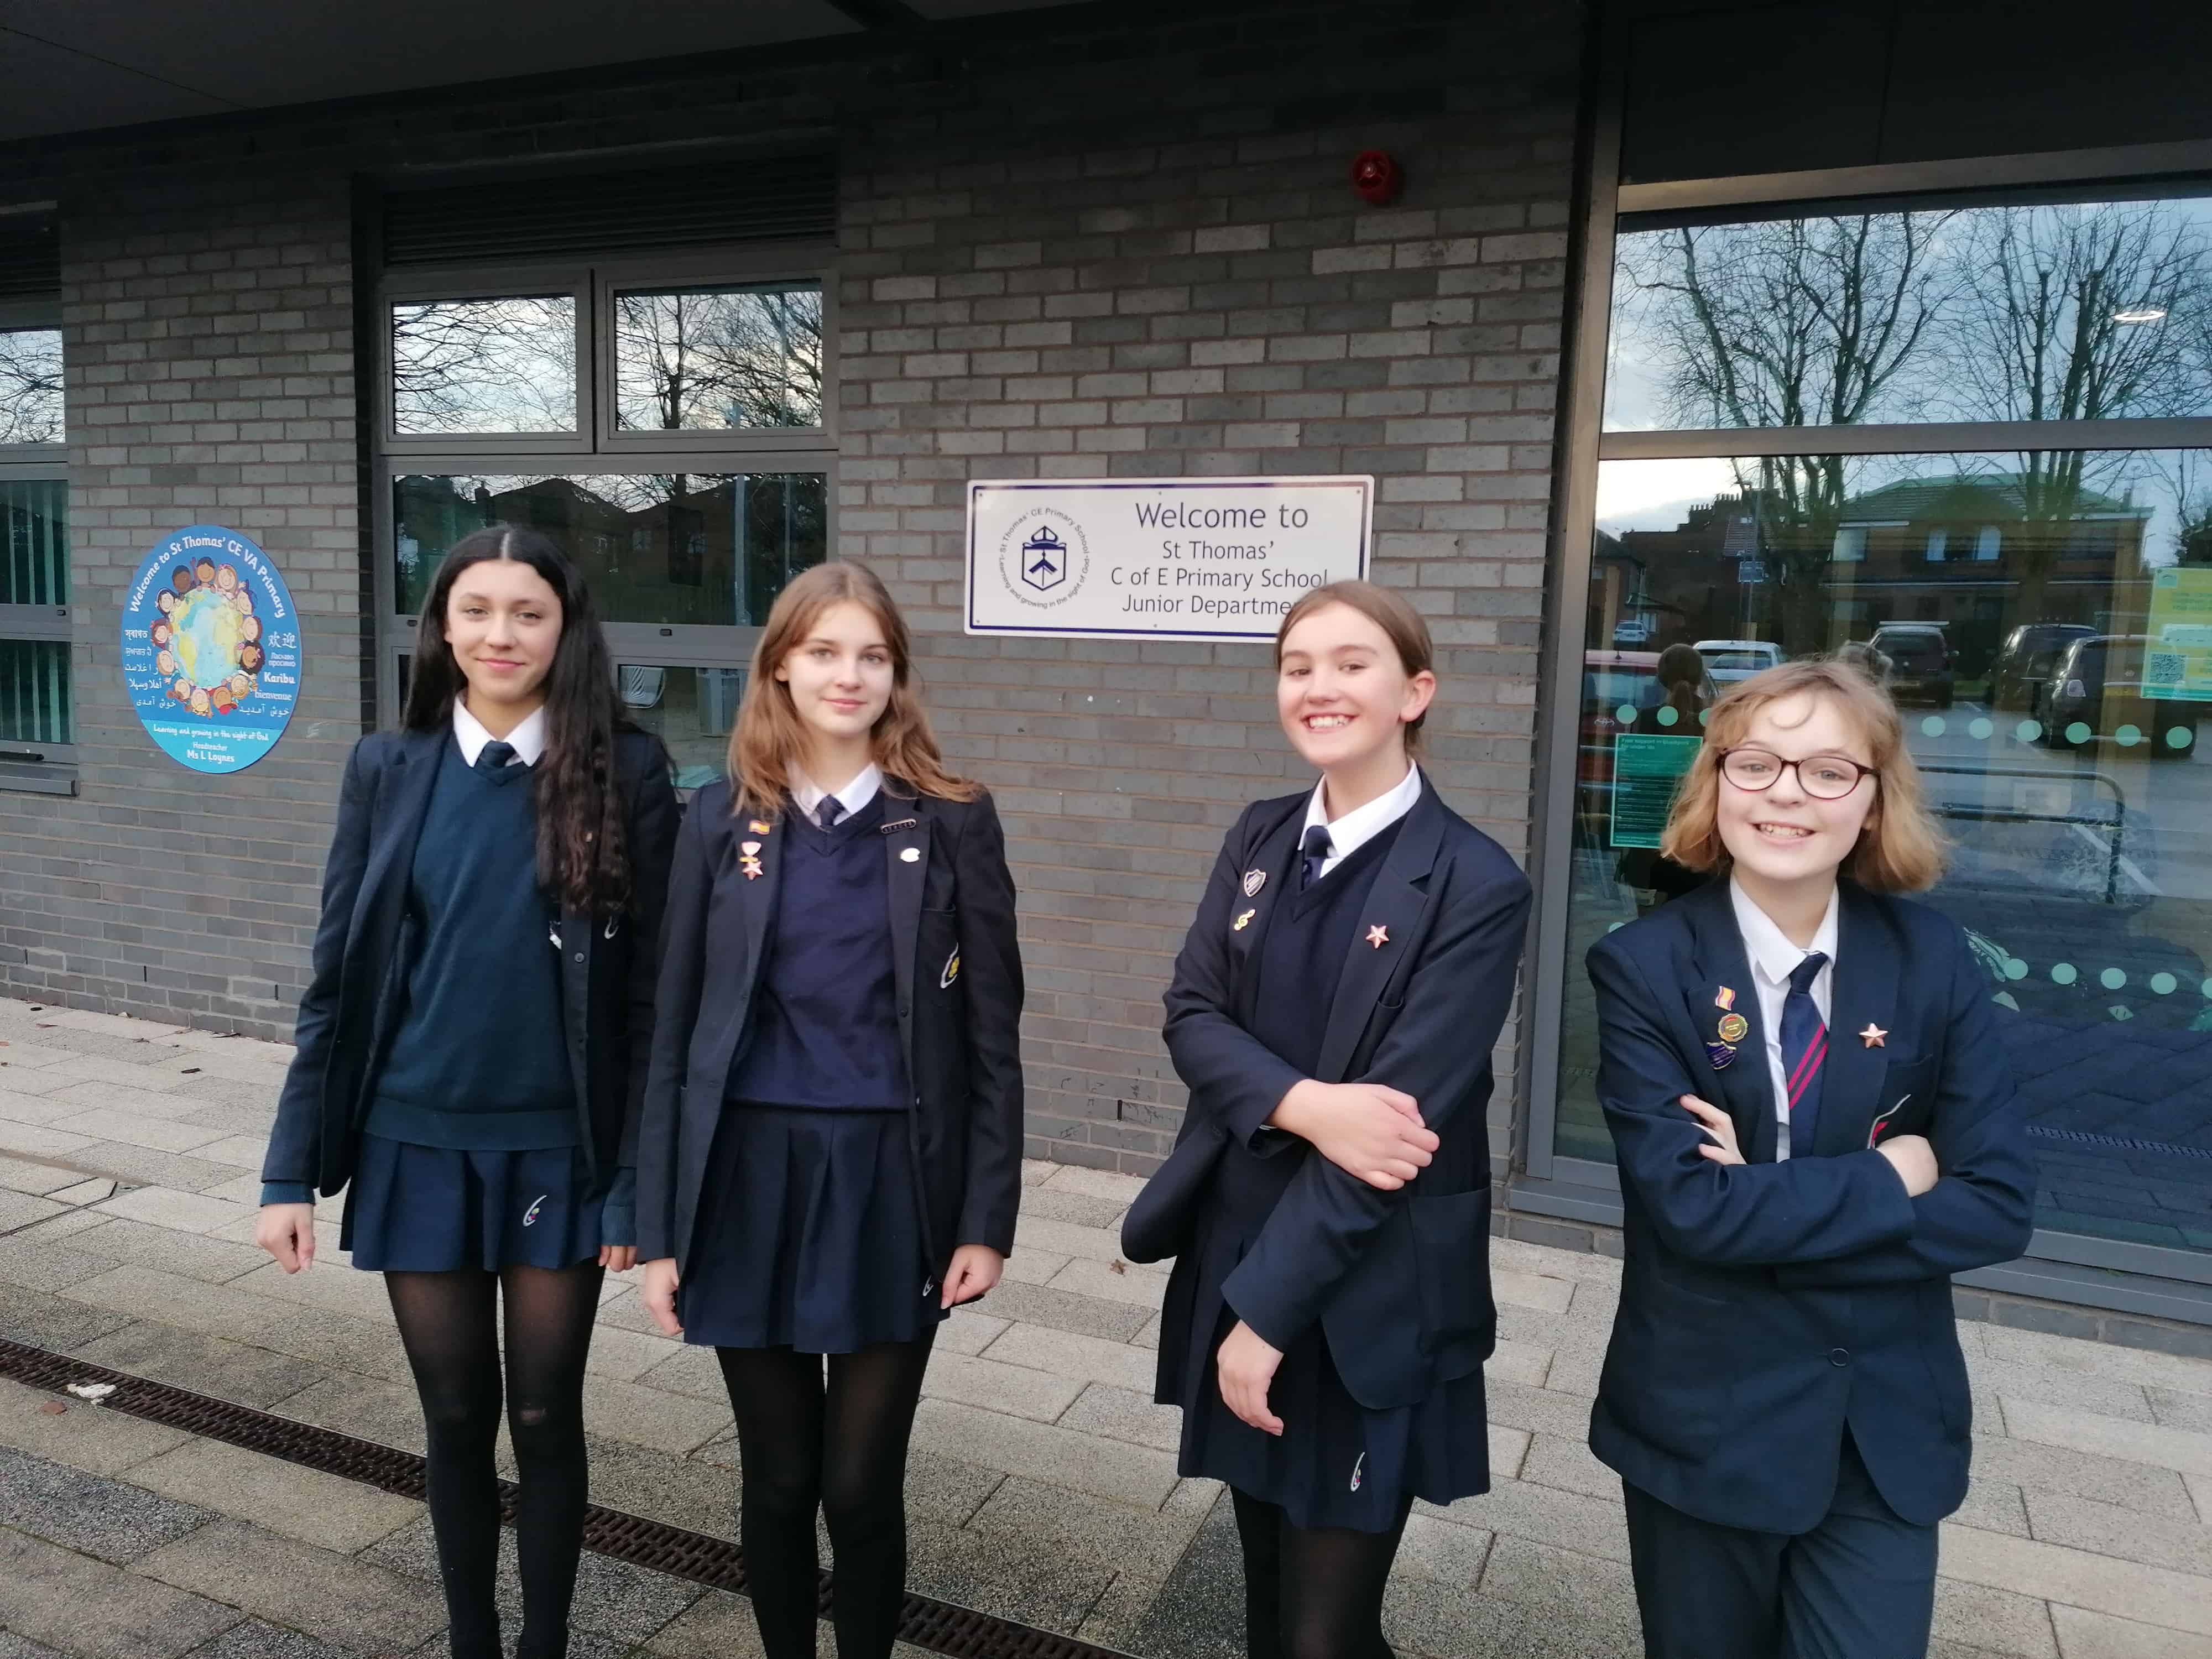 Languages ambassadors from Priestnall School stand outside of St Thomas' CE Primary School